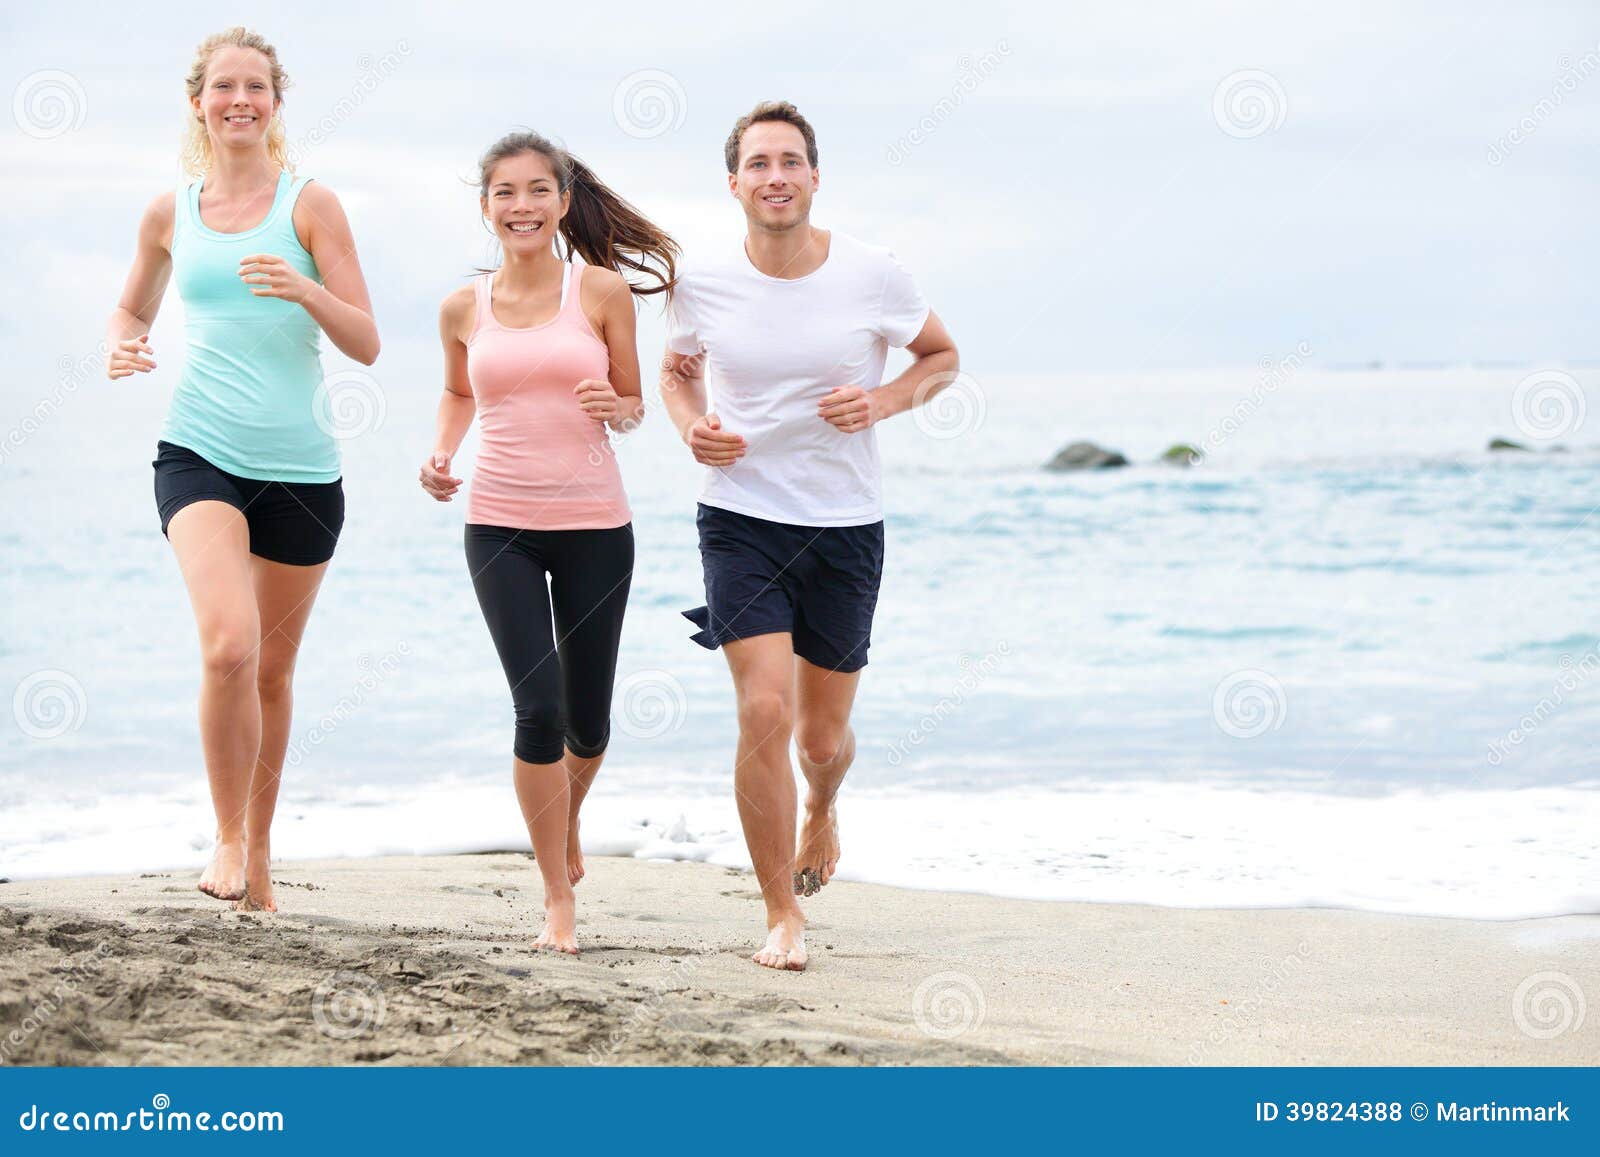 Exercising runners training outdoors living healthy active lifestyle ...